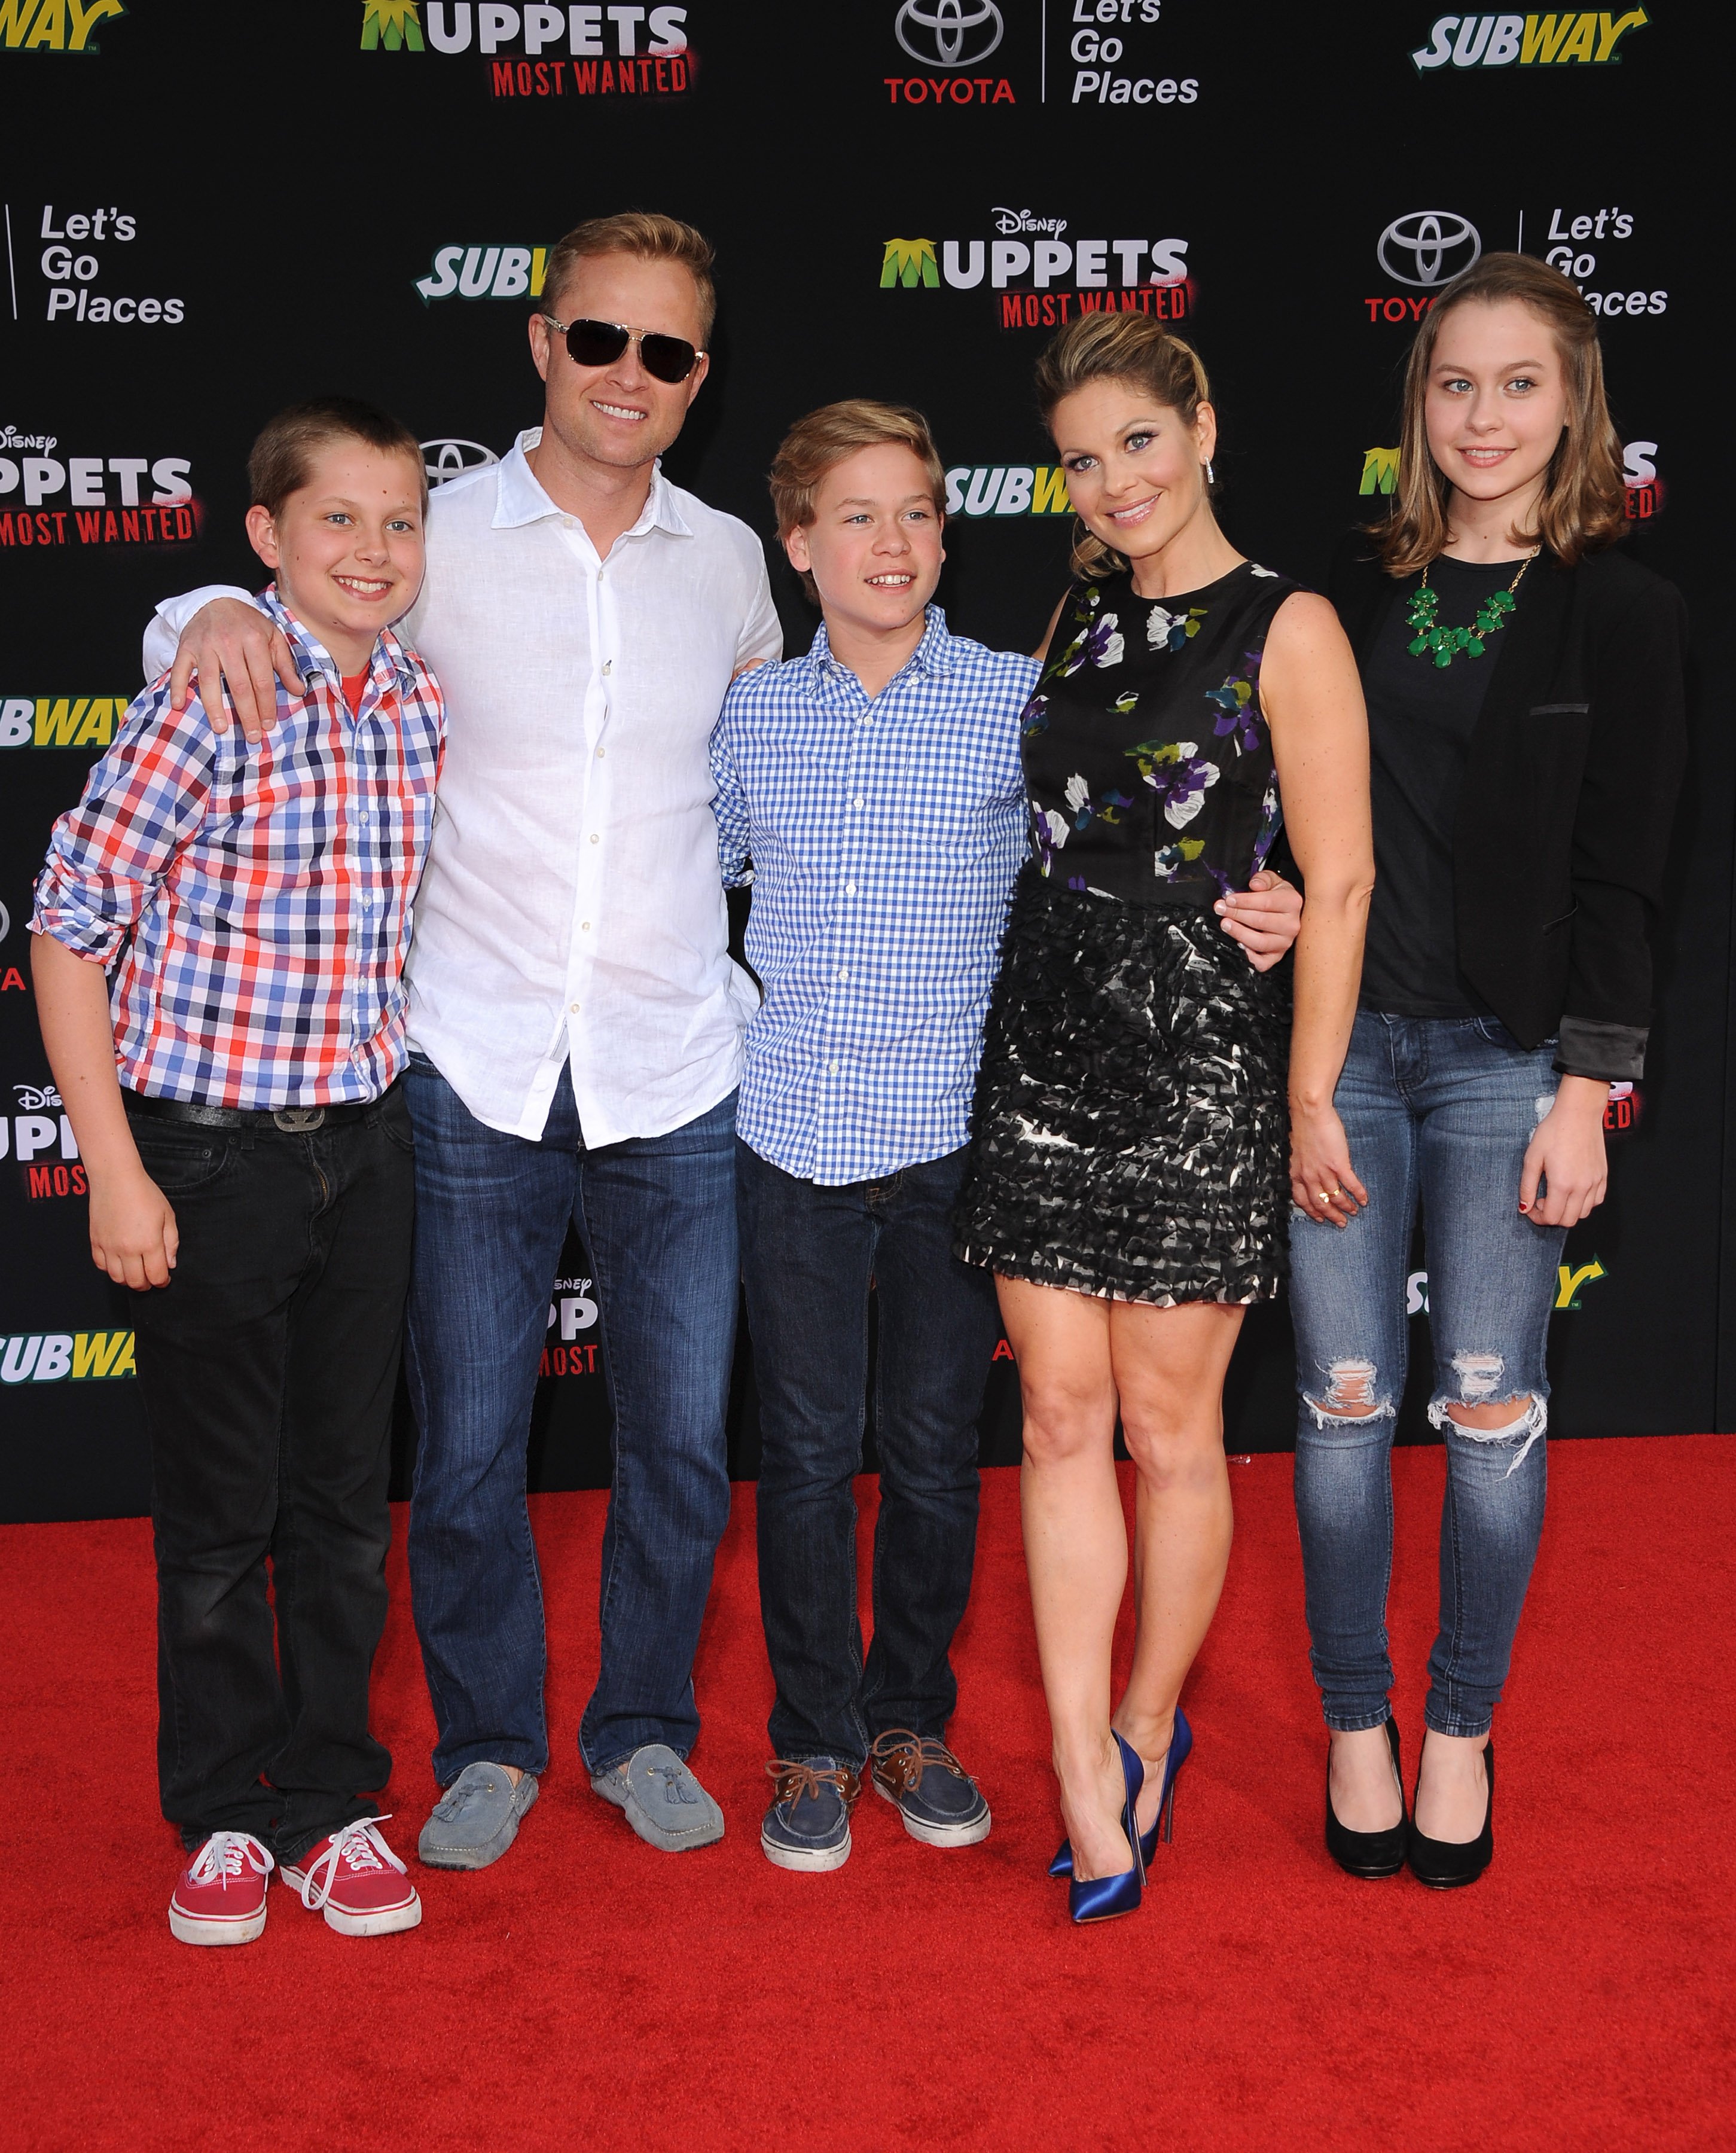 Actress Candace Cameron-Bure, husband Valeri Bure, daughter Natasha Bure, sons Lev Bure and Maksim Bure arrive at the Los Angeles premiere of 'Muppets Most Wanted' at the El Capitan Theatre on March 11, 2014 in Hollywood, California. | Source: Getty Images